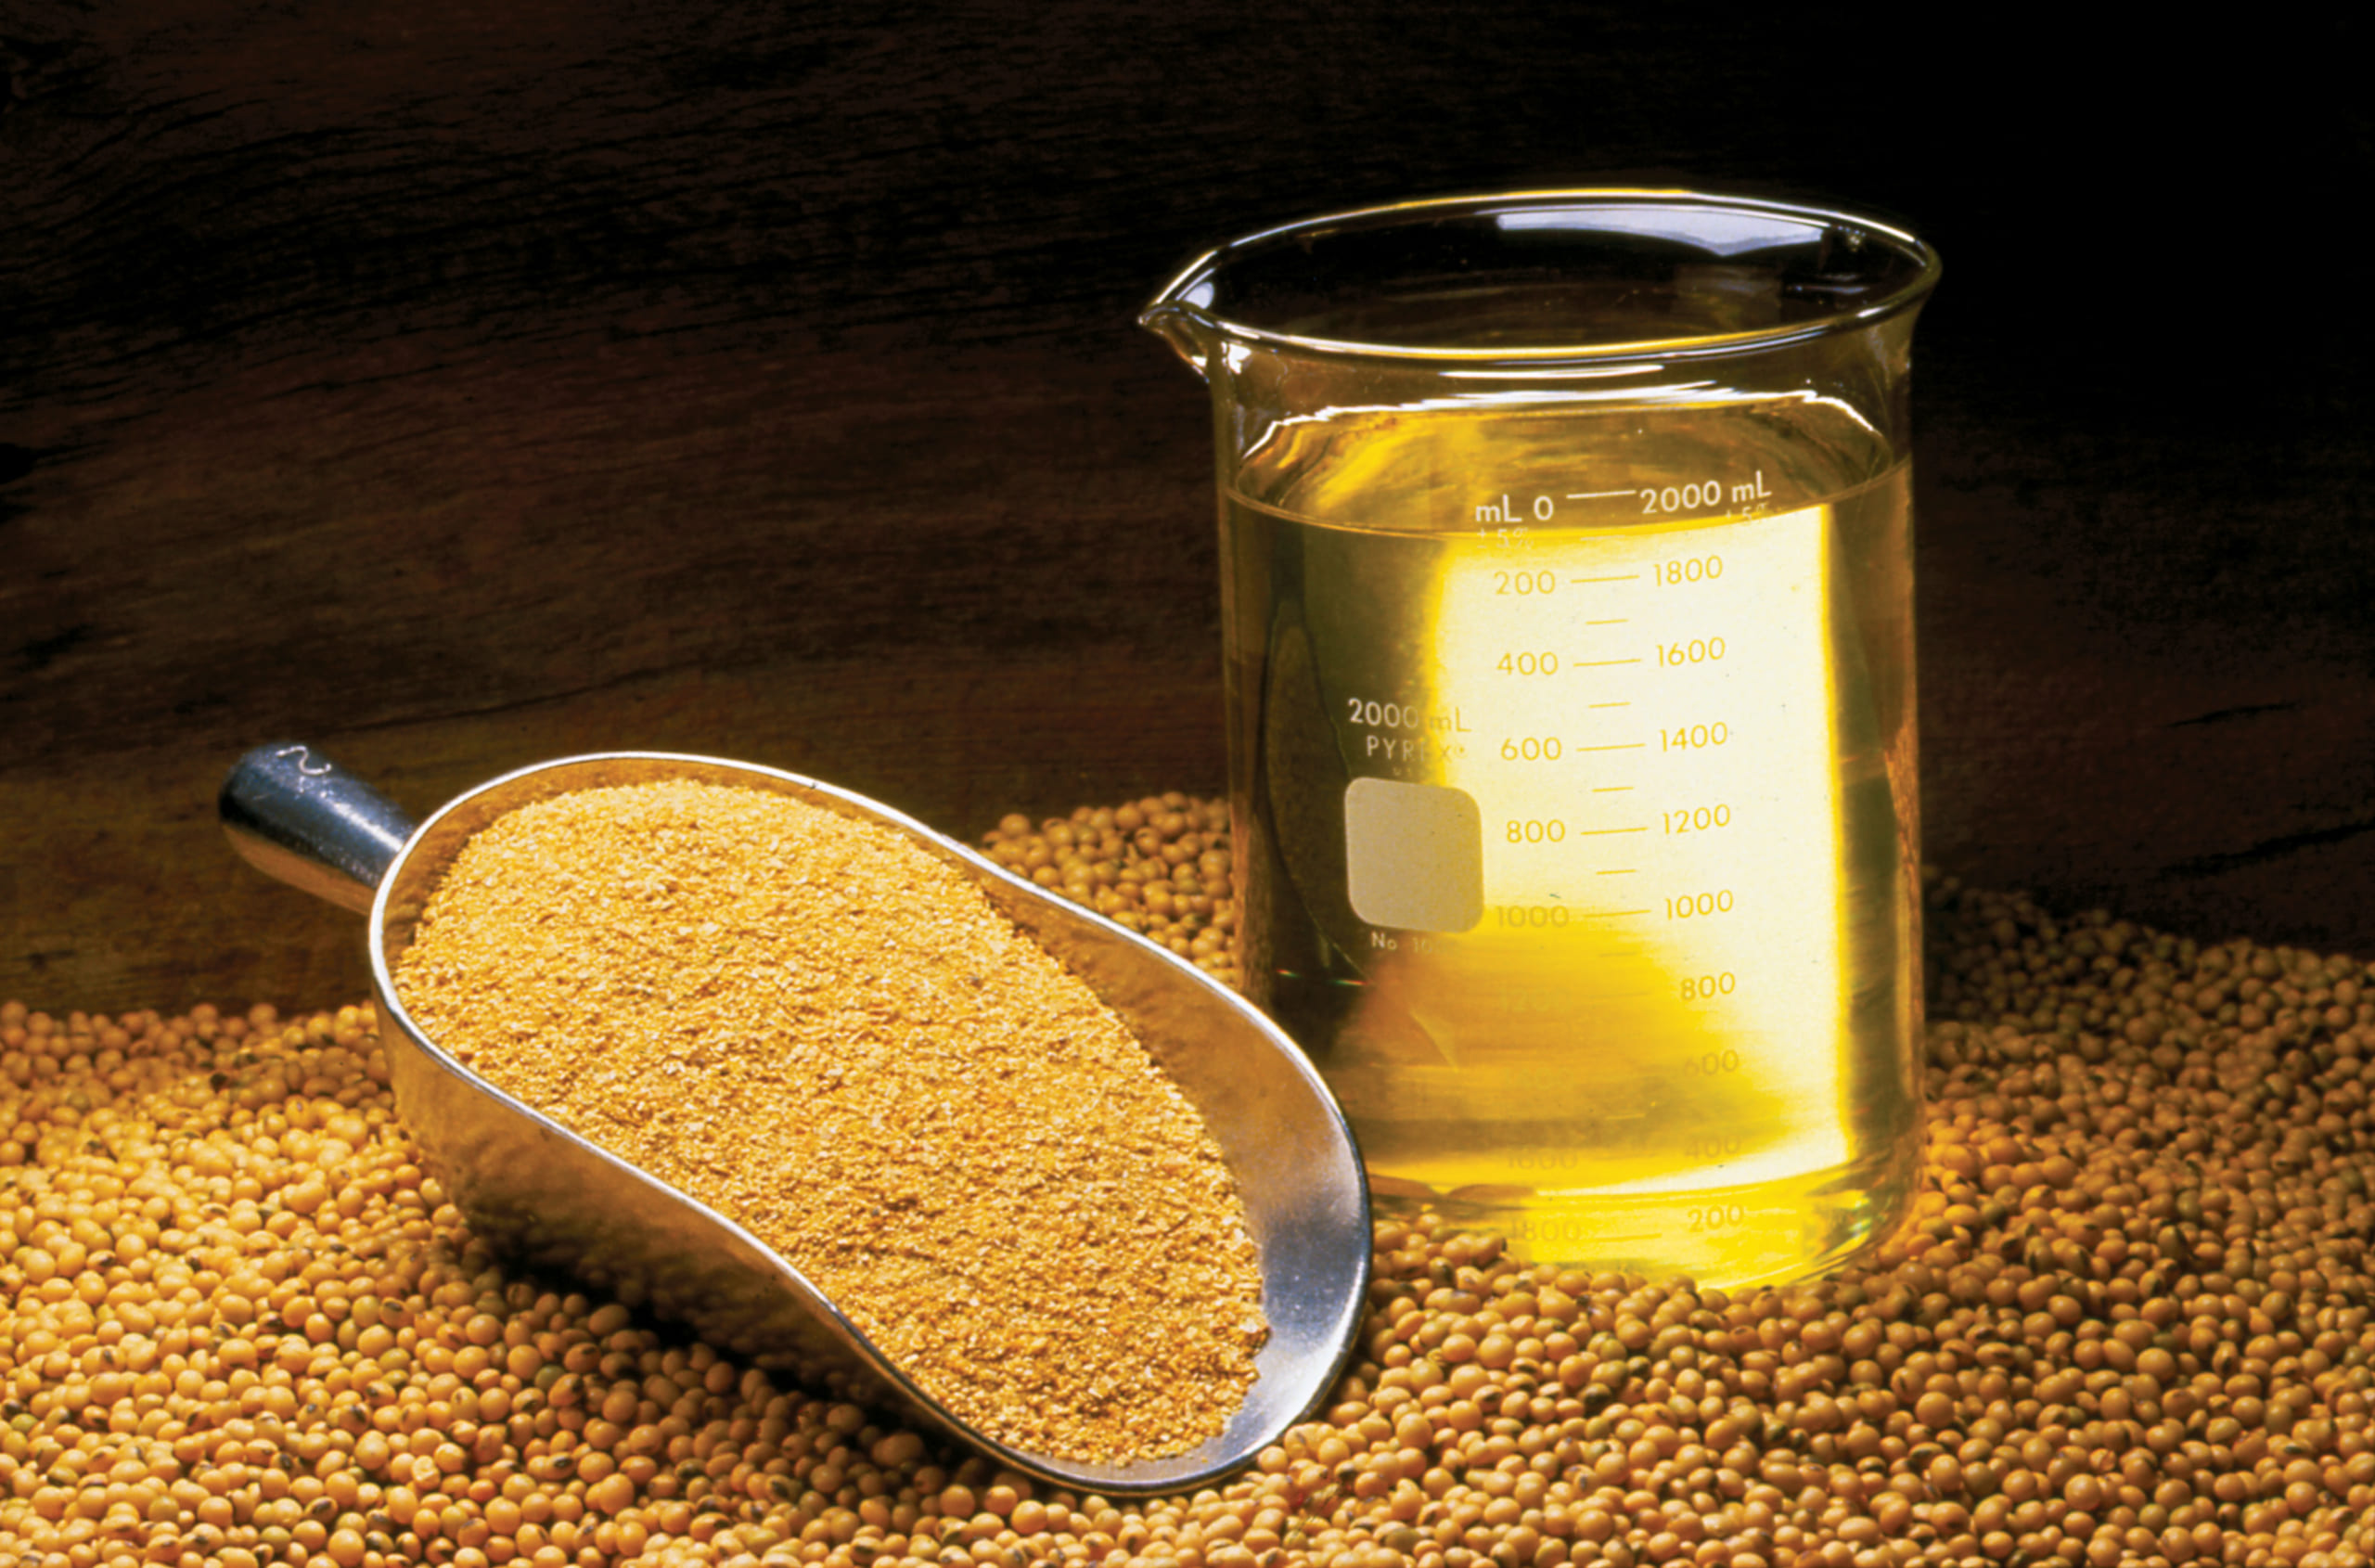 [SOYBEAN OIL] Top 5 Factors Influencing On Soybean Oil Prices